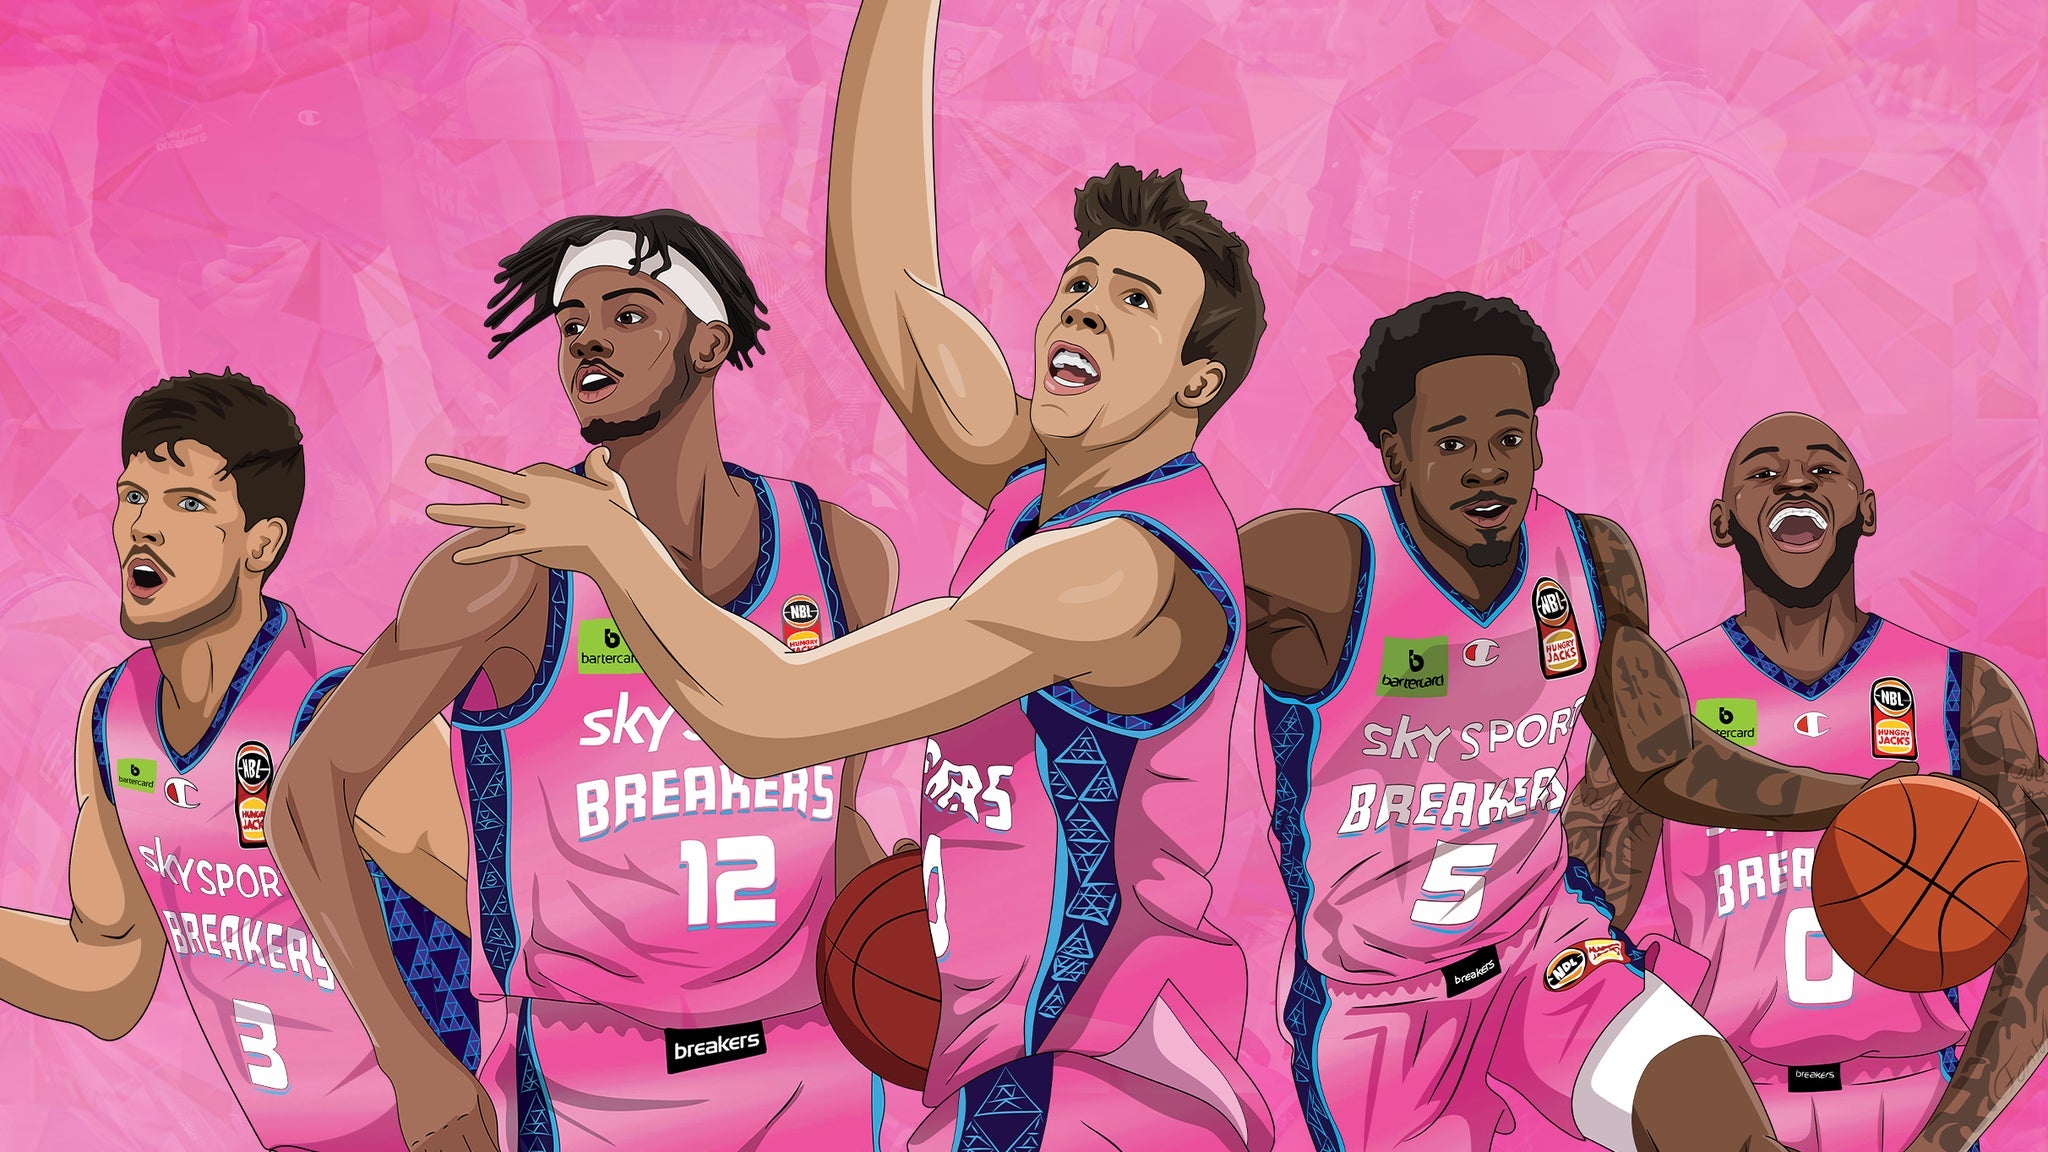 Sky Sport Breakers Playoff - Game 1 in Auckland promo photo for Additional Members and Partner presale offer code